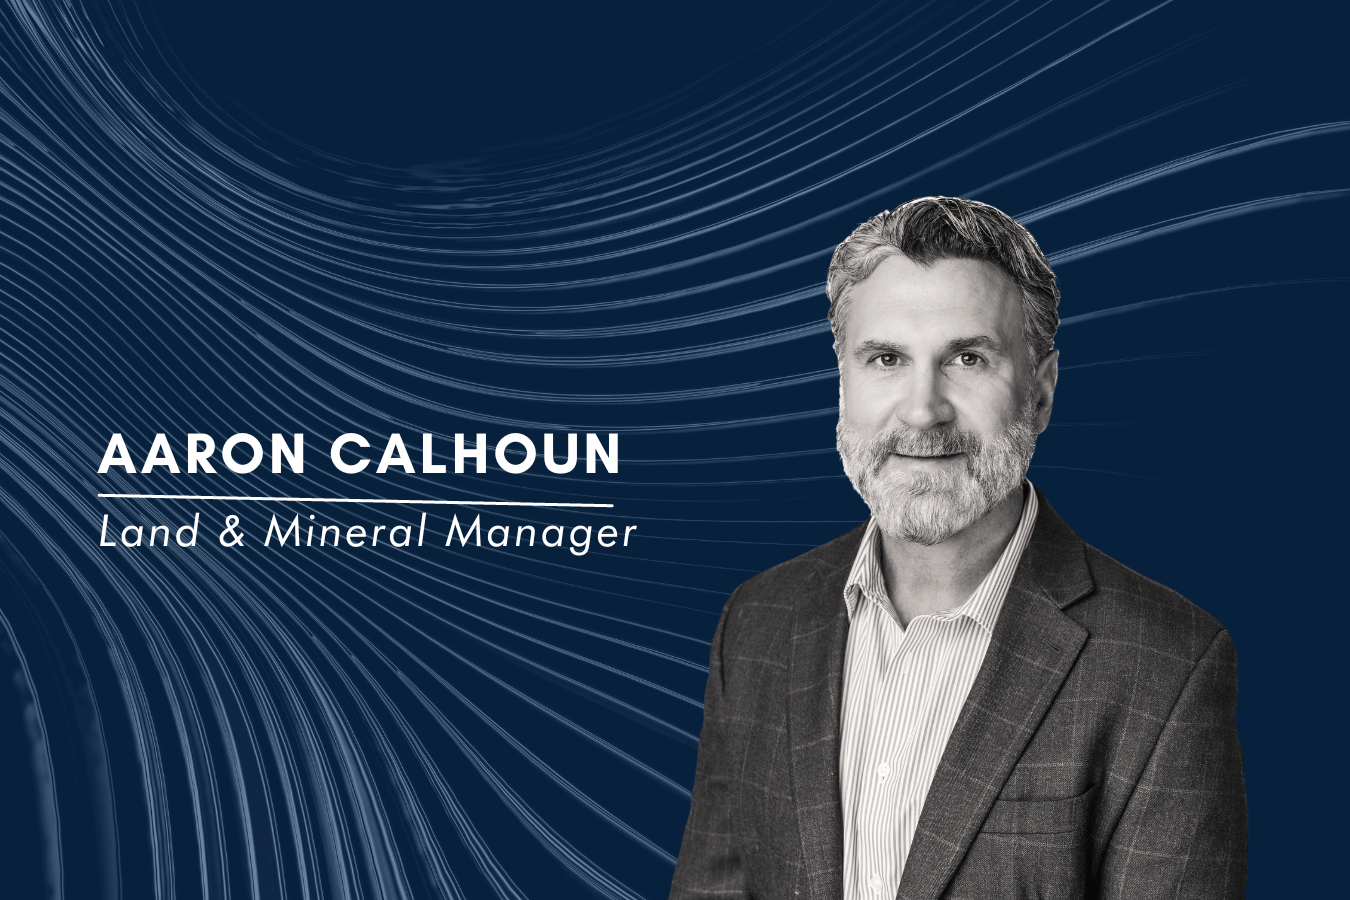 valor hires aaron calhoun as land and mineral manager for valor